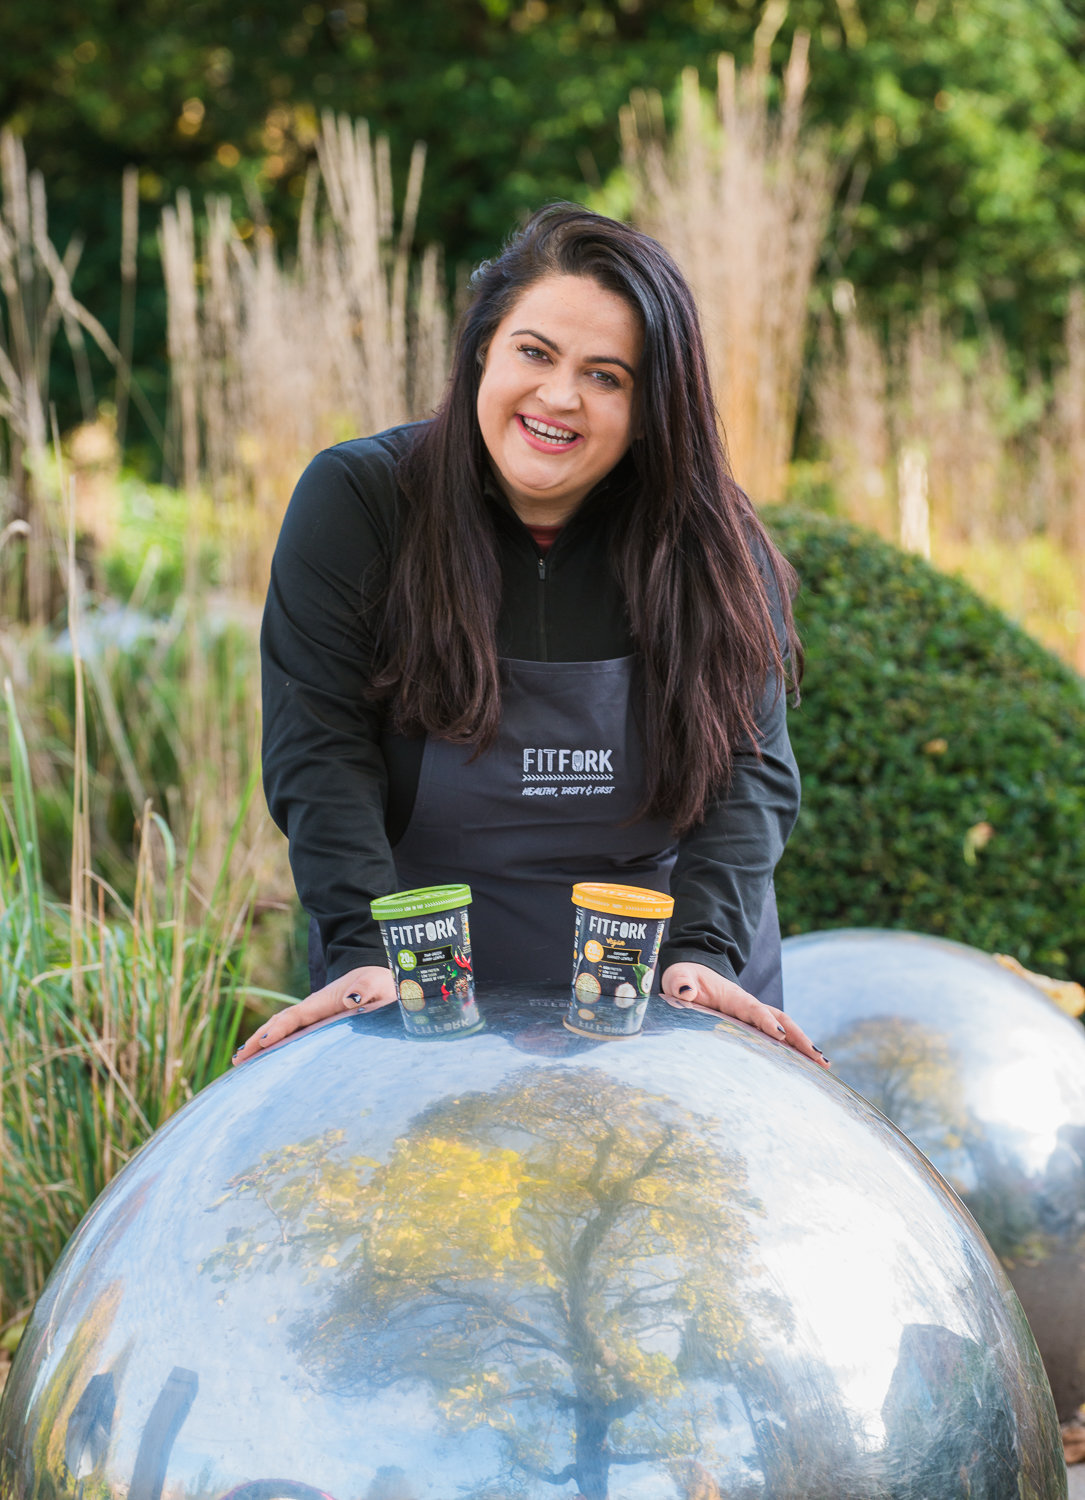 Female chef with black hair in a park promoting healthy food